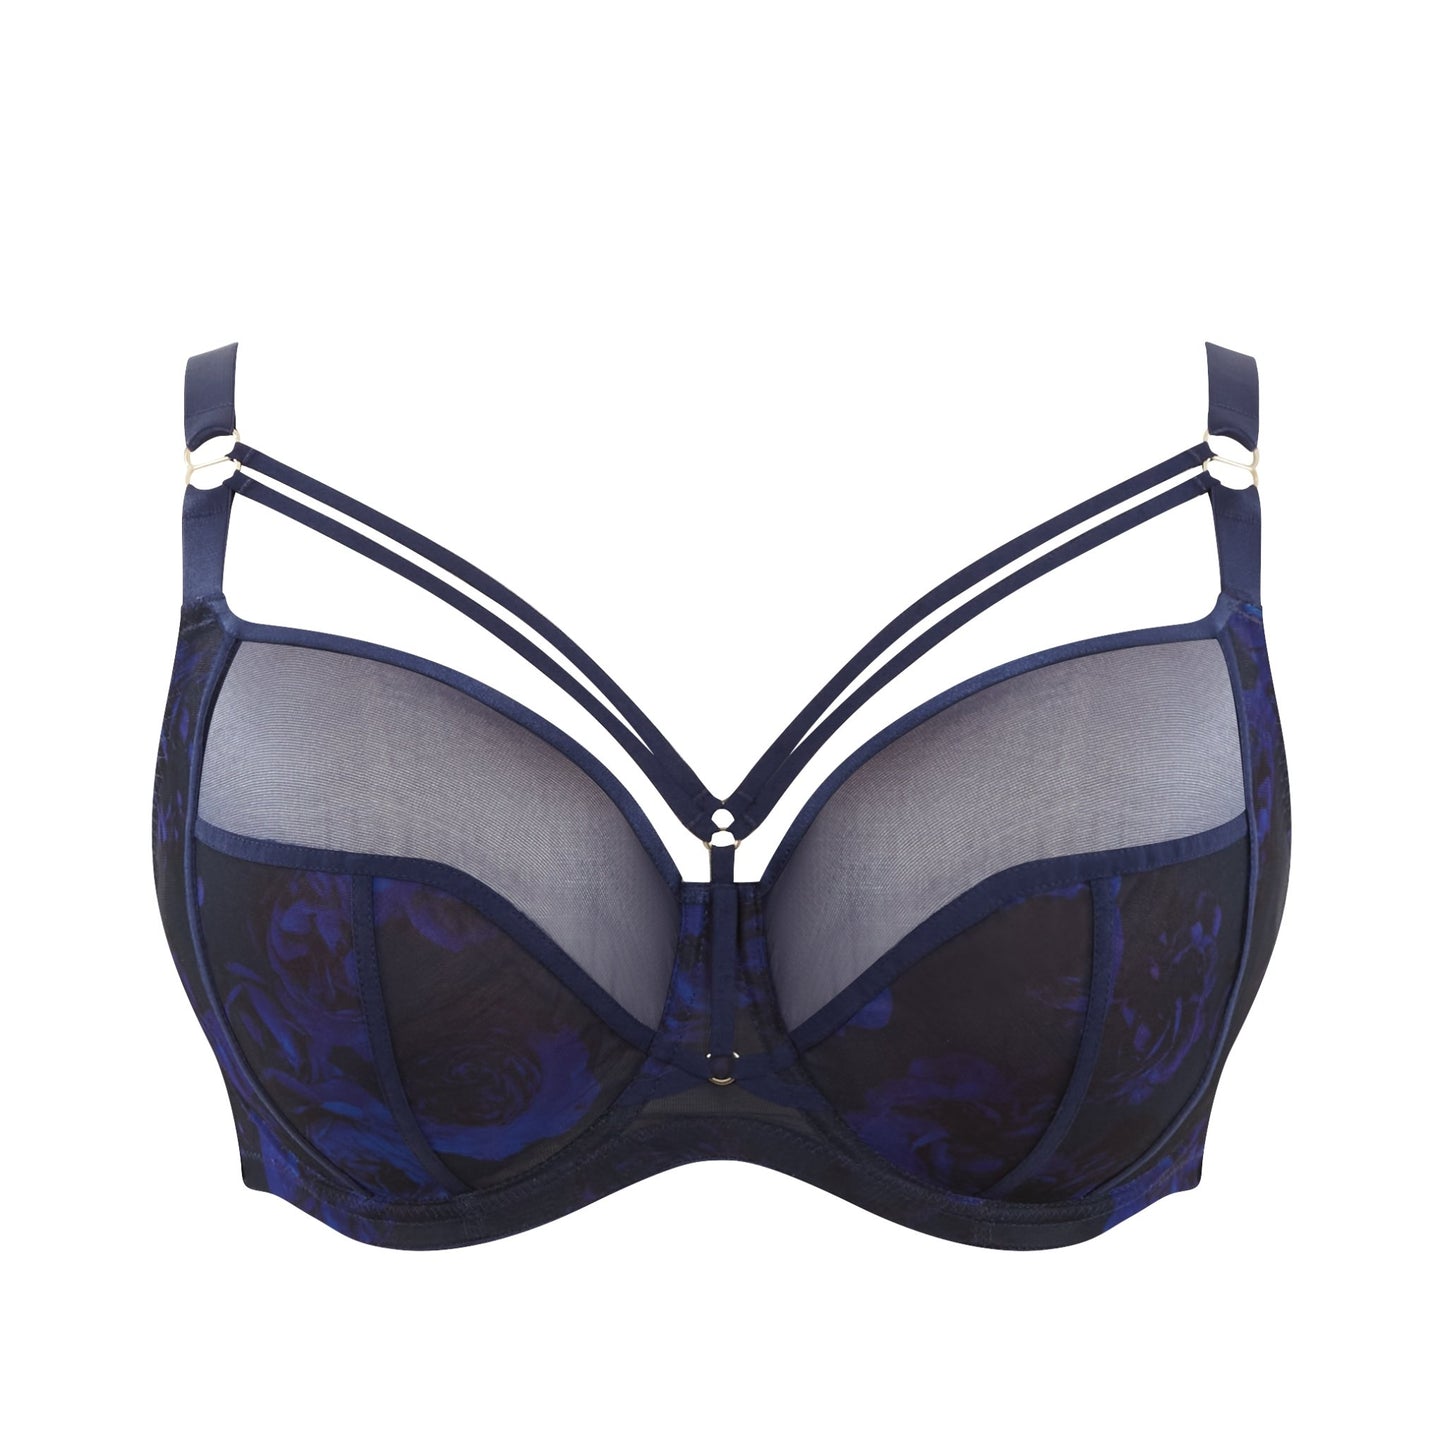 Dionne Full Cup Bra in Exotic Bloom - Pinned Up Bra Lounge